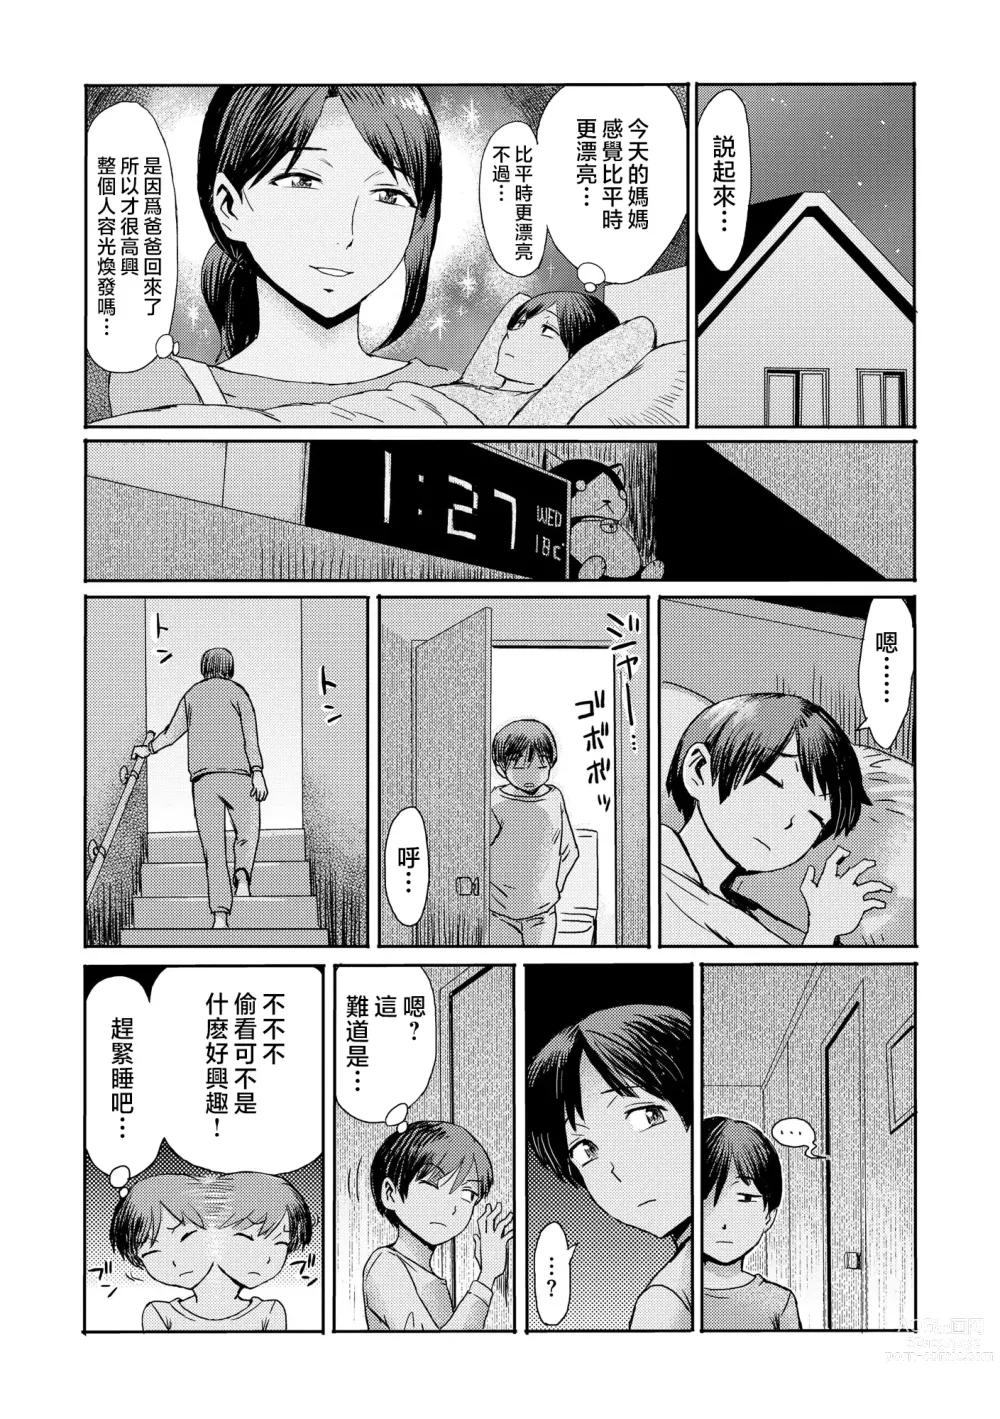 Page 6 of manga Soukan Syndrome